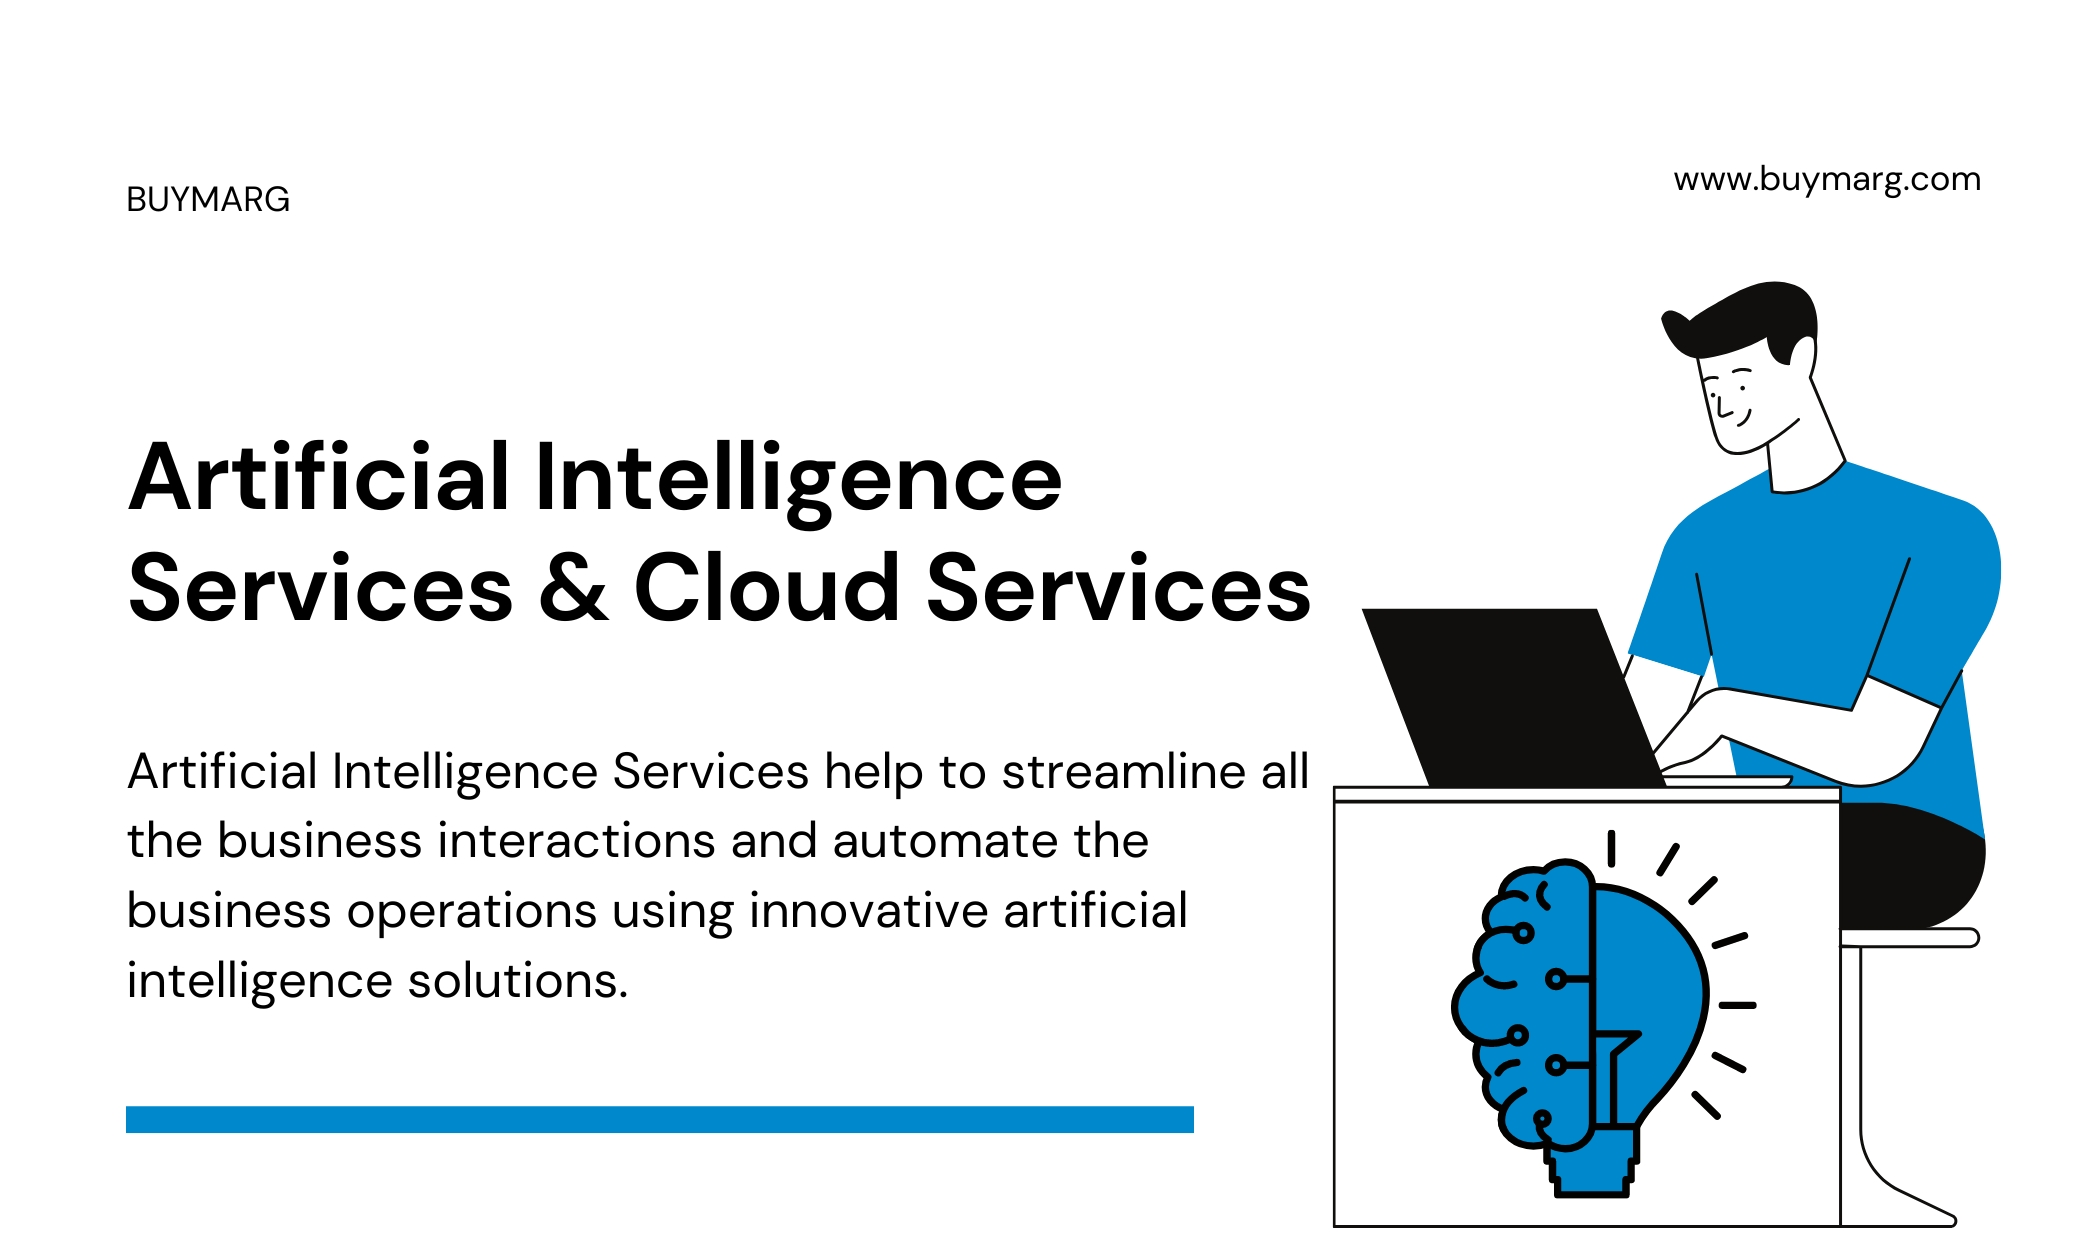 Artificial Intelligence and Cloud Services